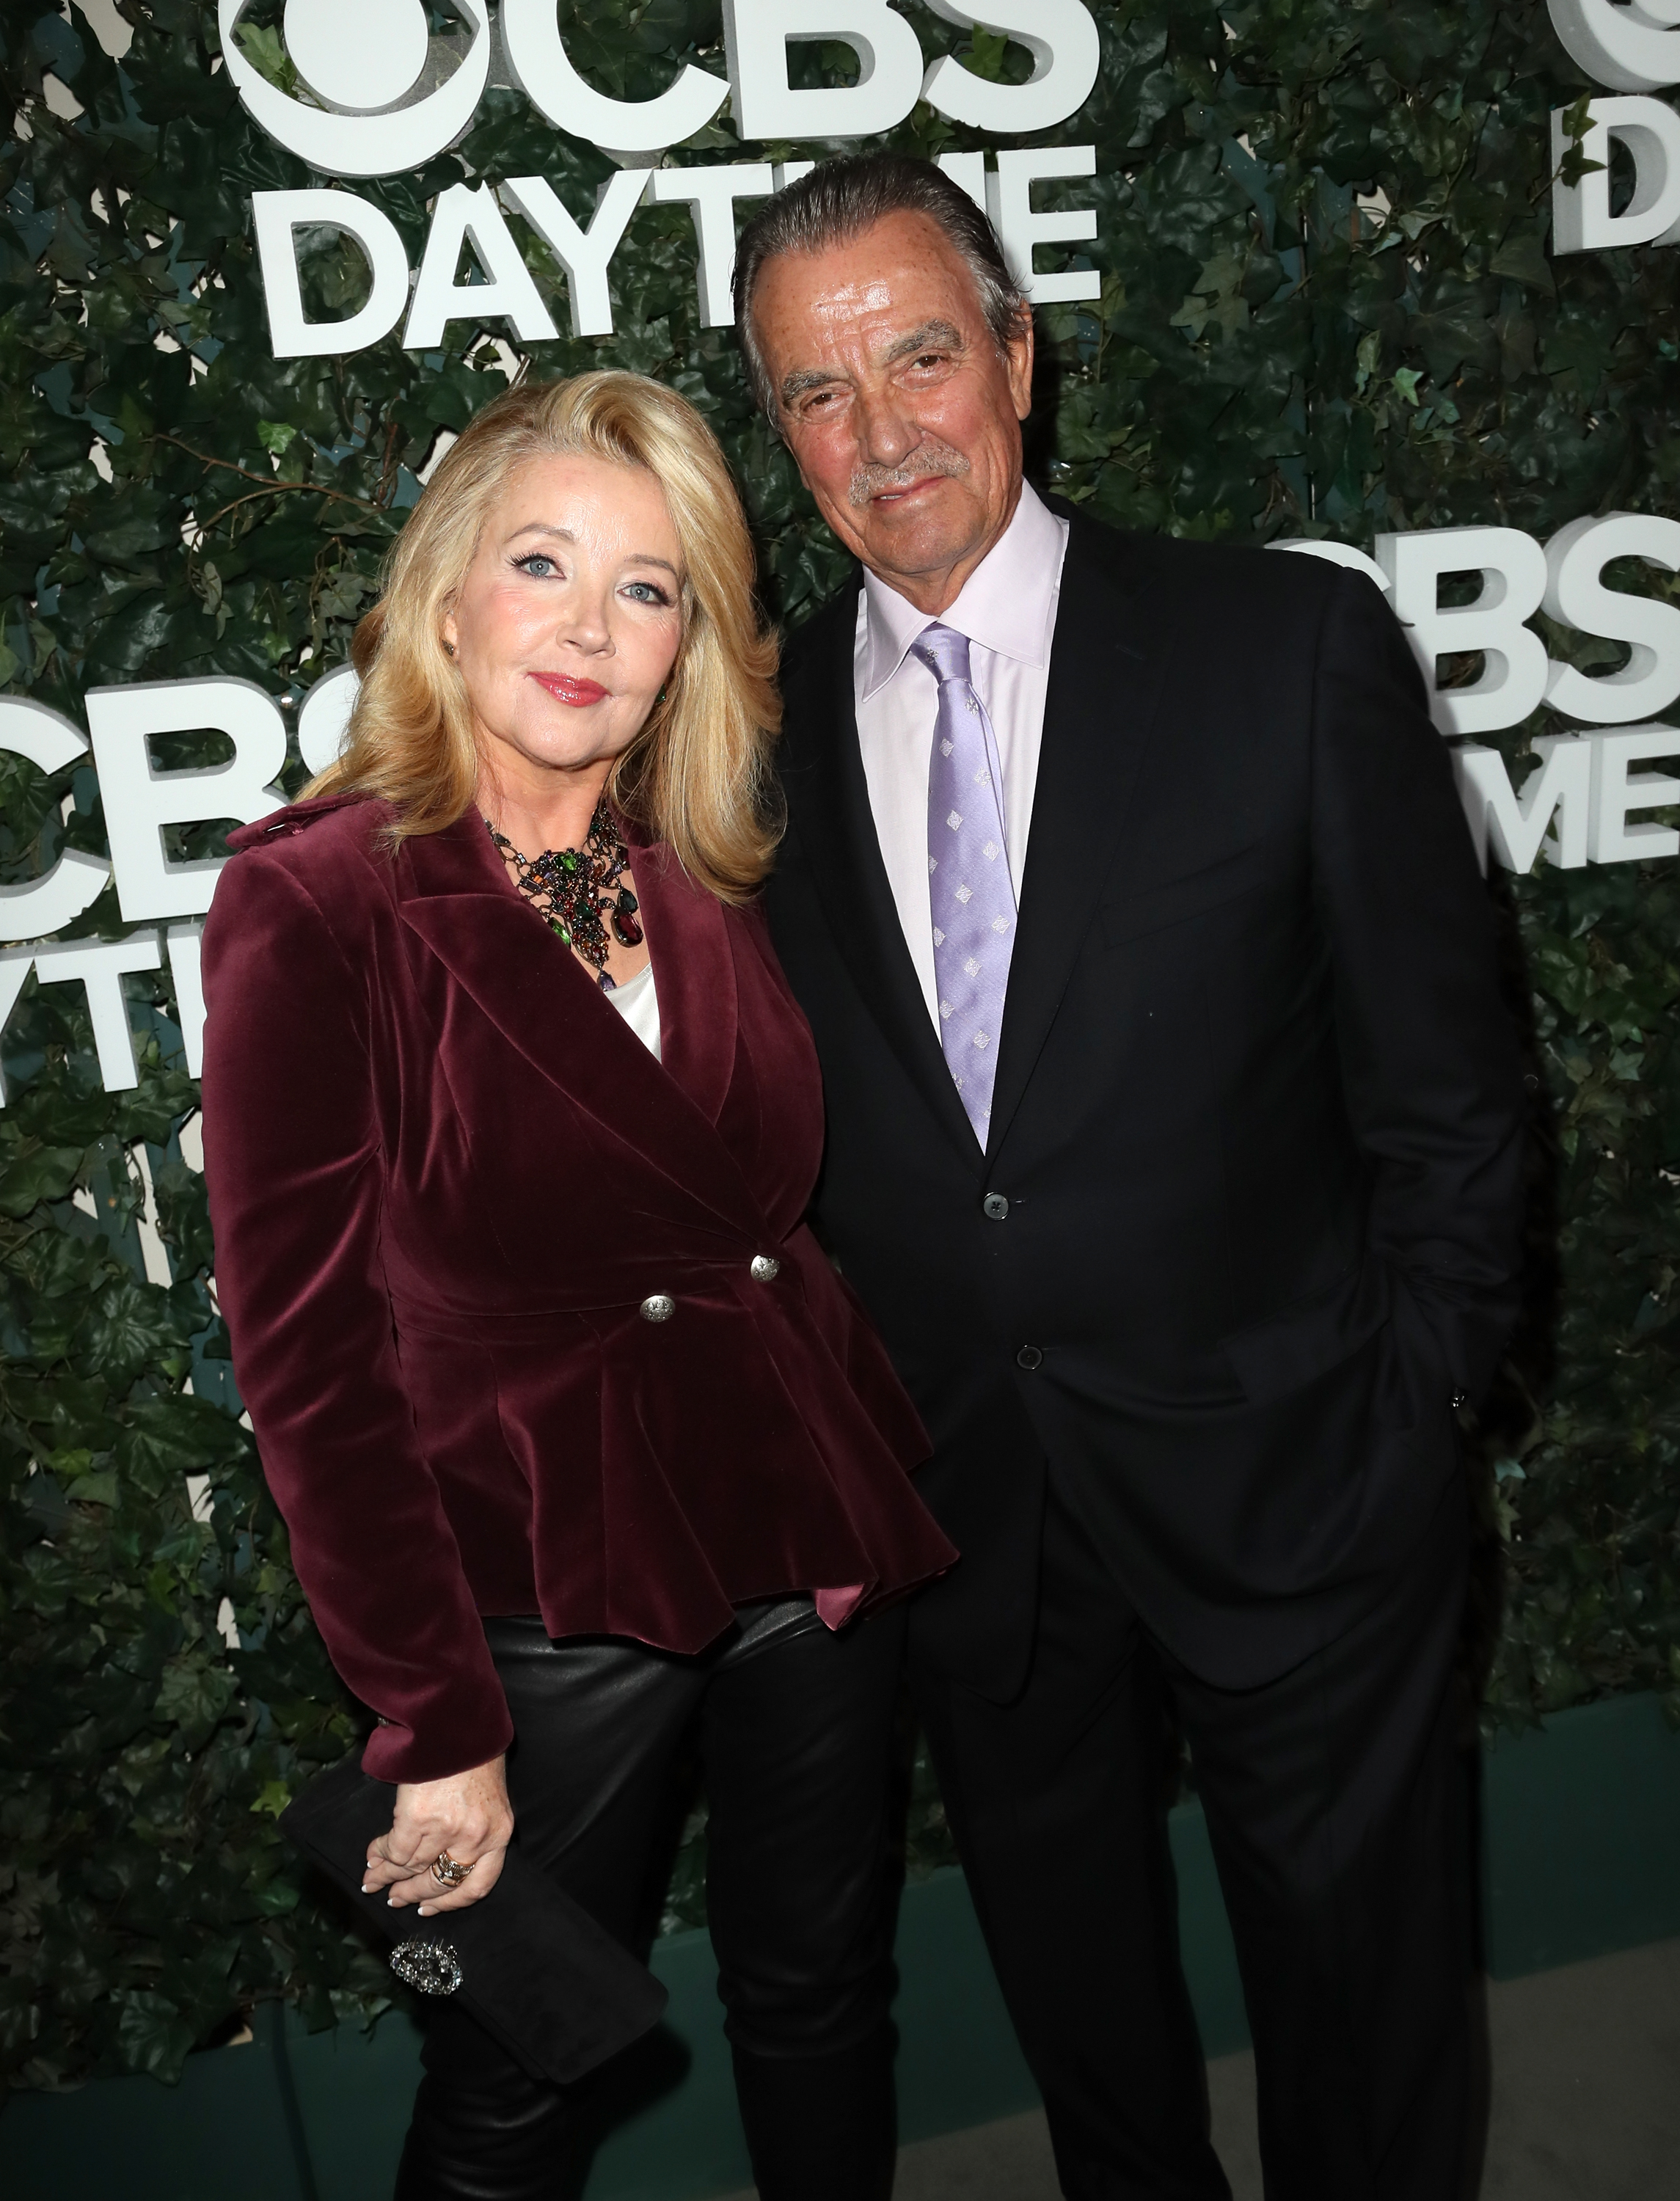 Actor Eric Braeden (R) and Dale Russell Gudegast attend the CBS Daytime #1 for 30 Years at The Paley Center for Media on October 10, 2016 in Beverly Hills, California. | Source: Getty Images